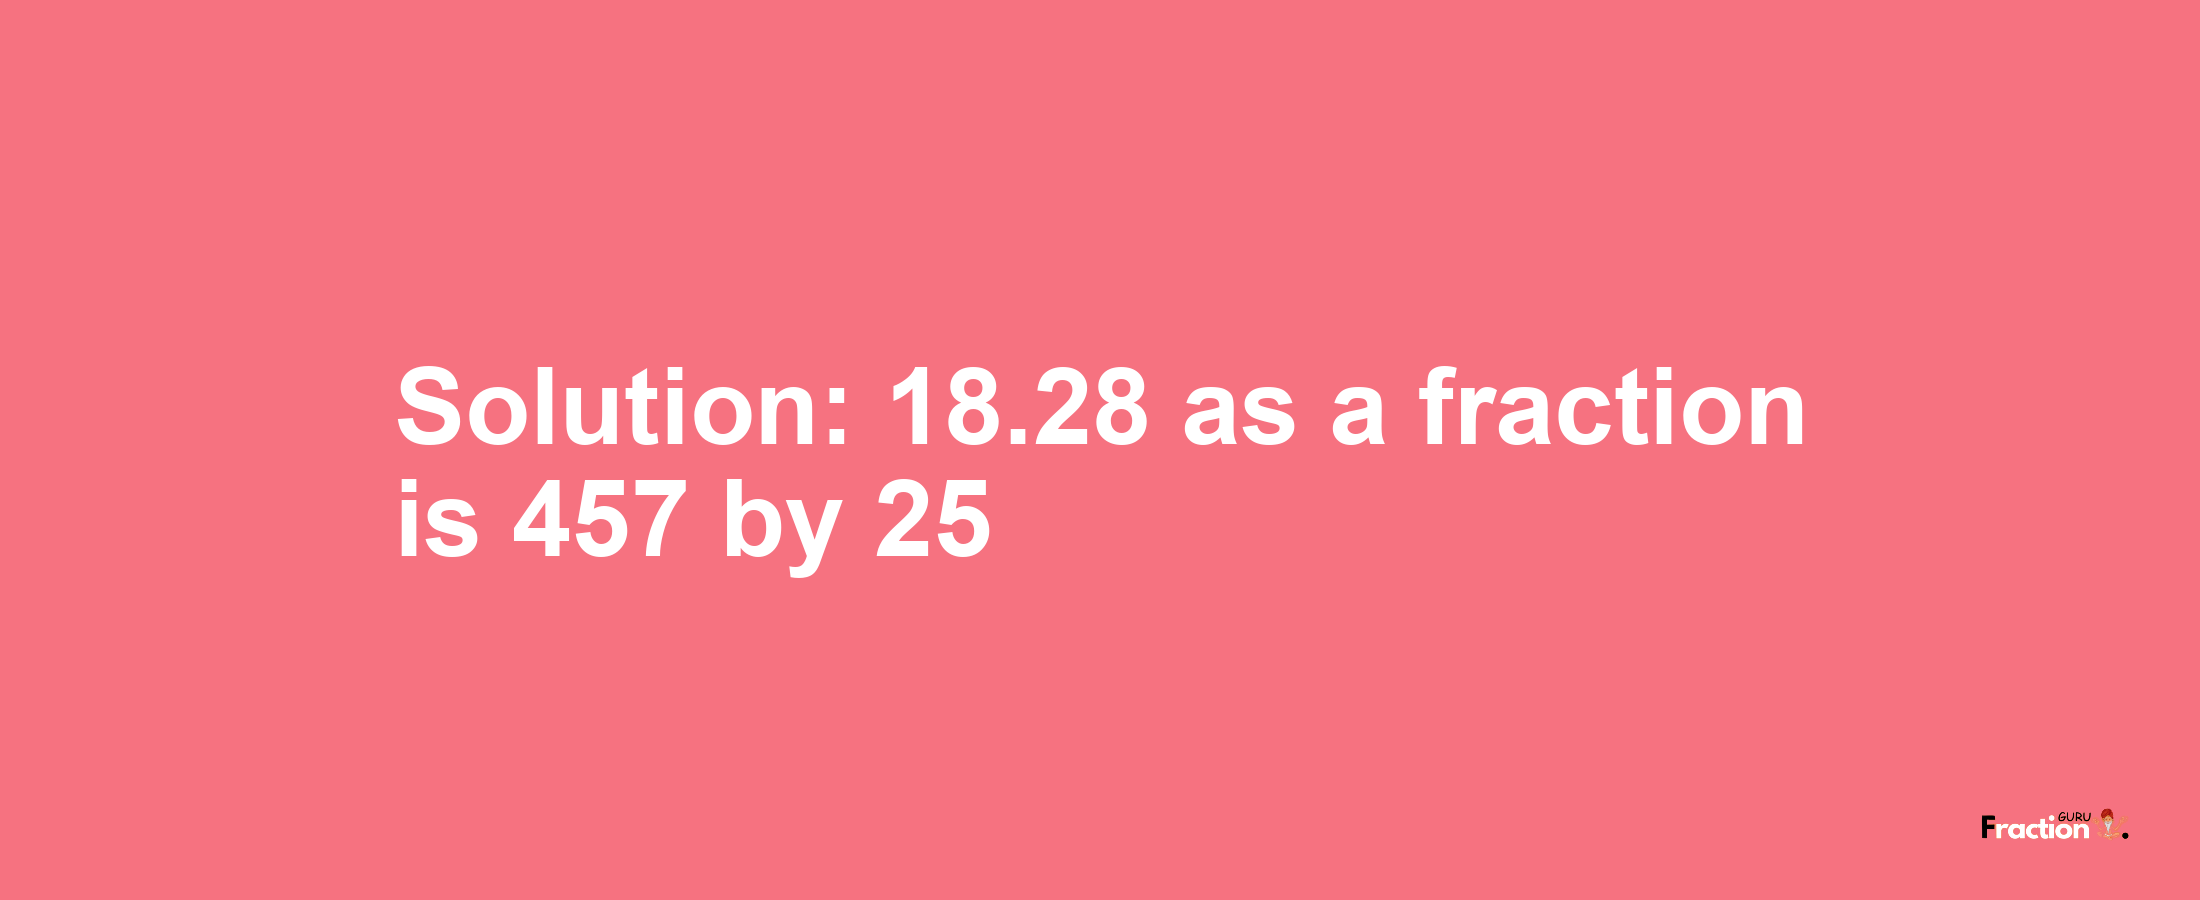 Solution:18.28 as a fraction is 457/25